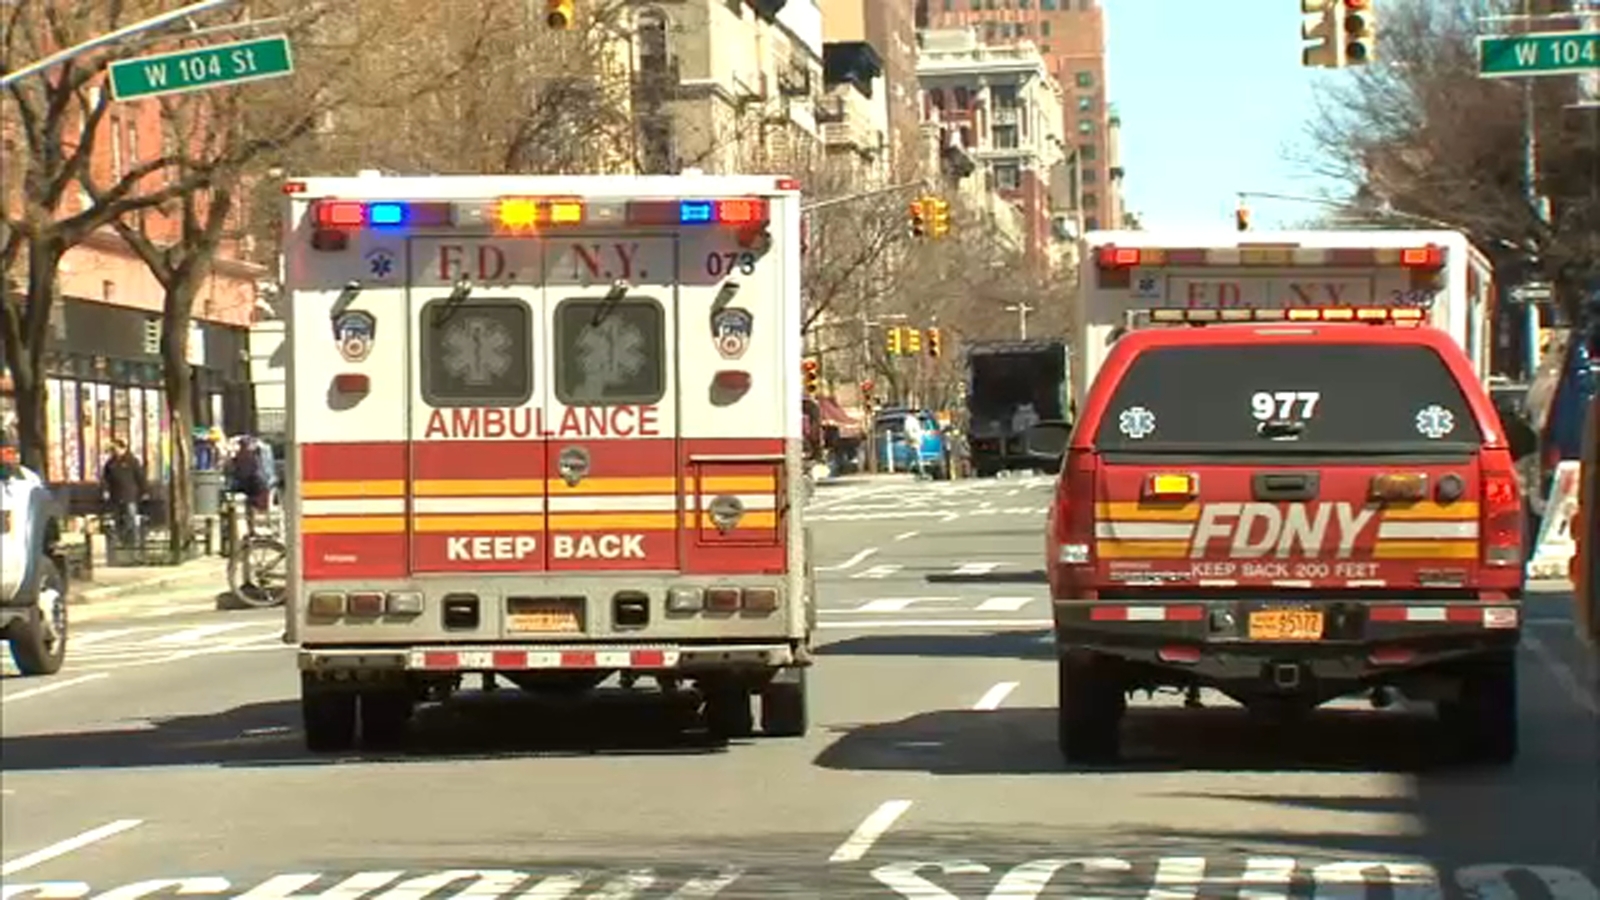 FDNY could charge around $1.4K for ambulance rides with new price hike proposal